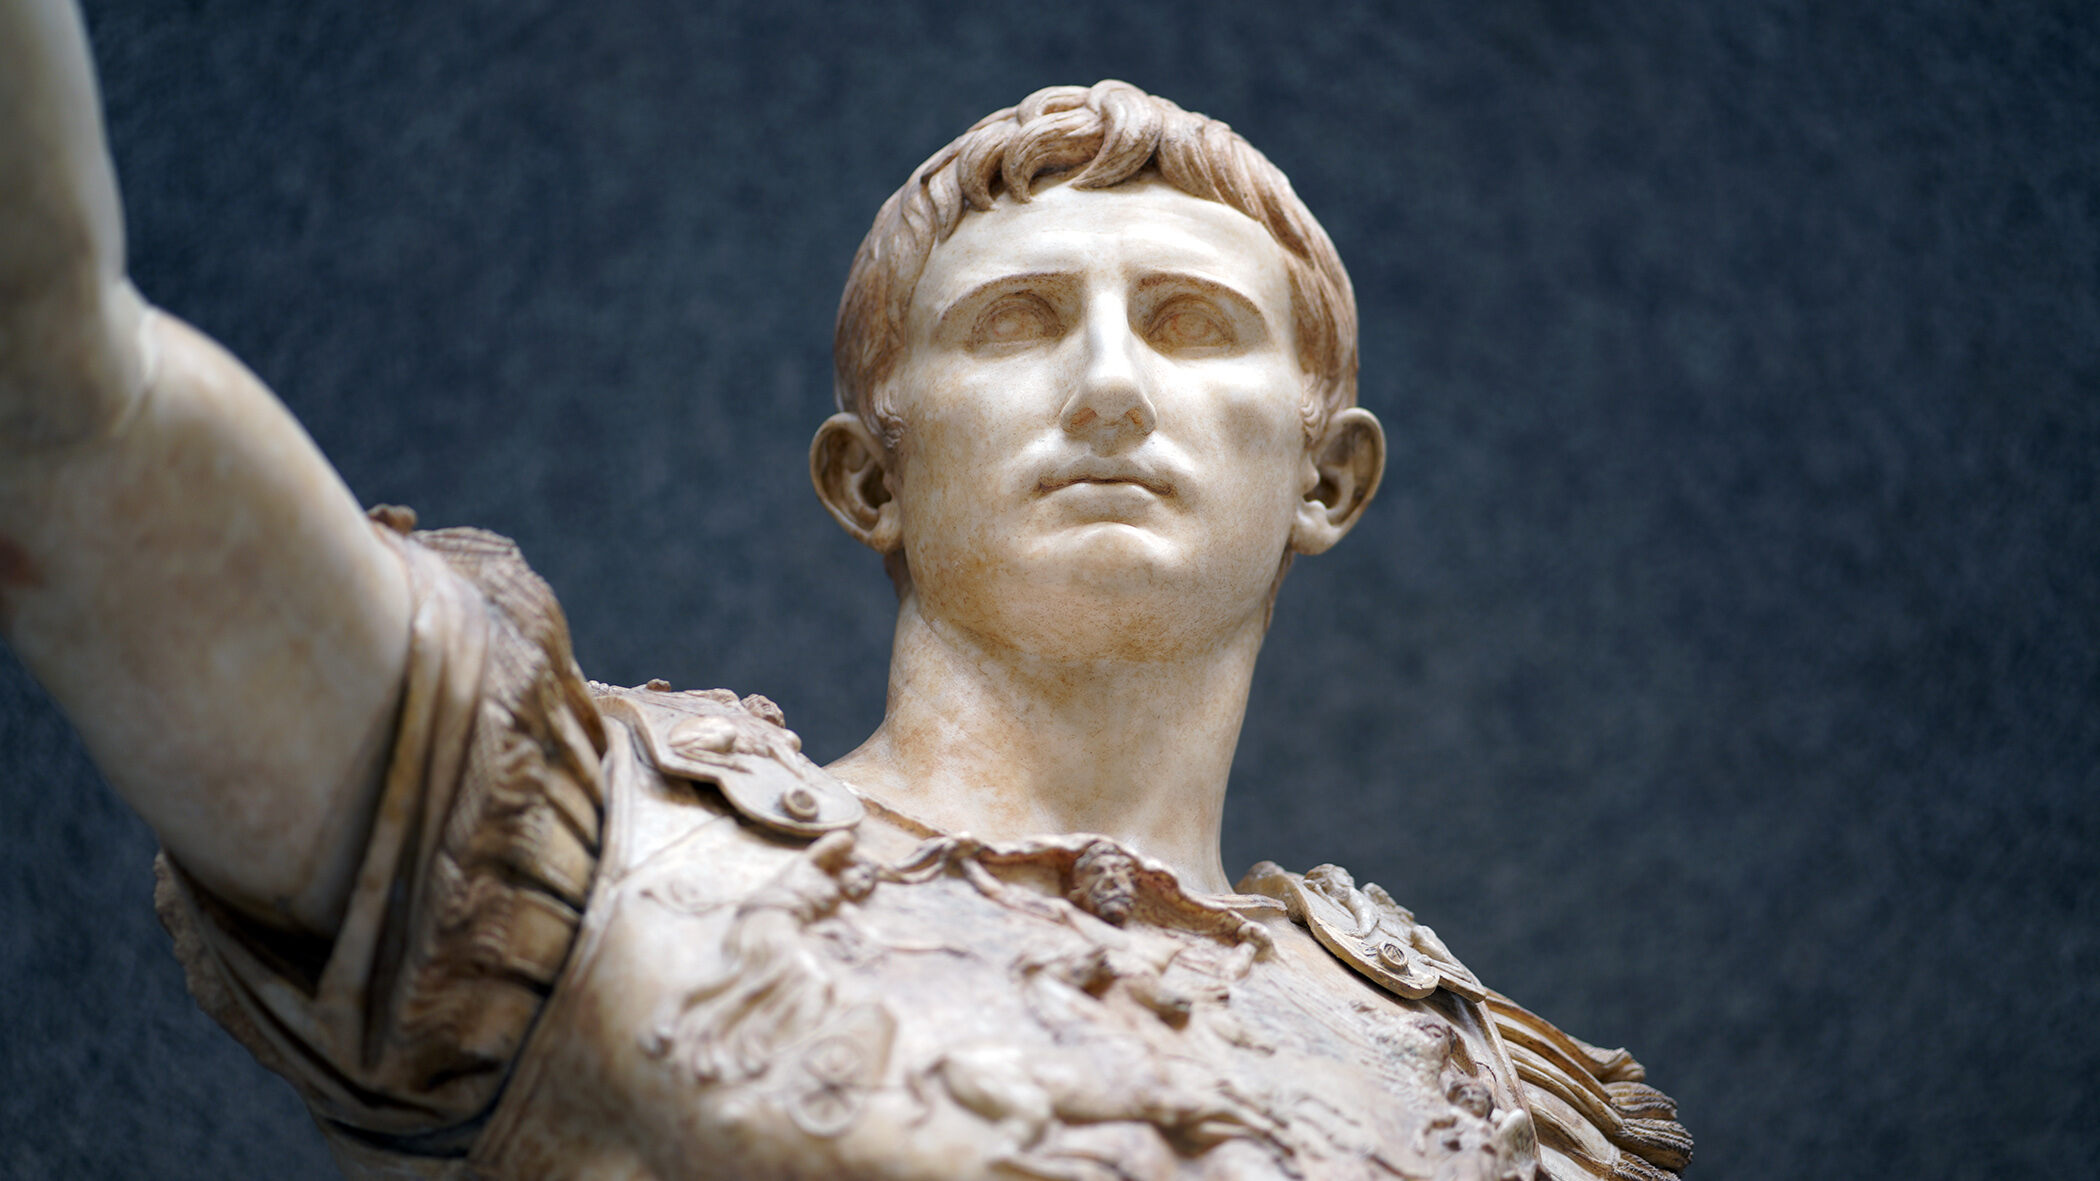 How Does Augustus Of Primaporta Differ From Greek Classical Sculpture?